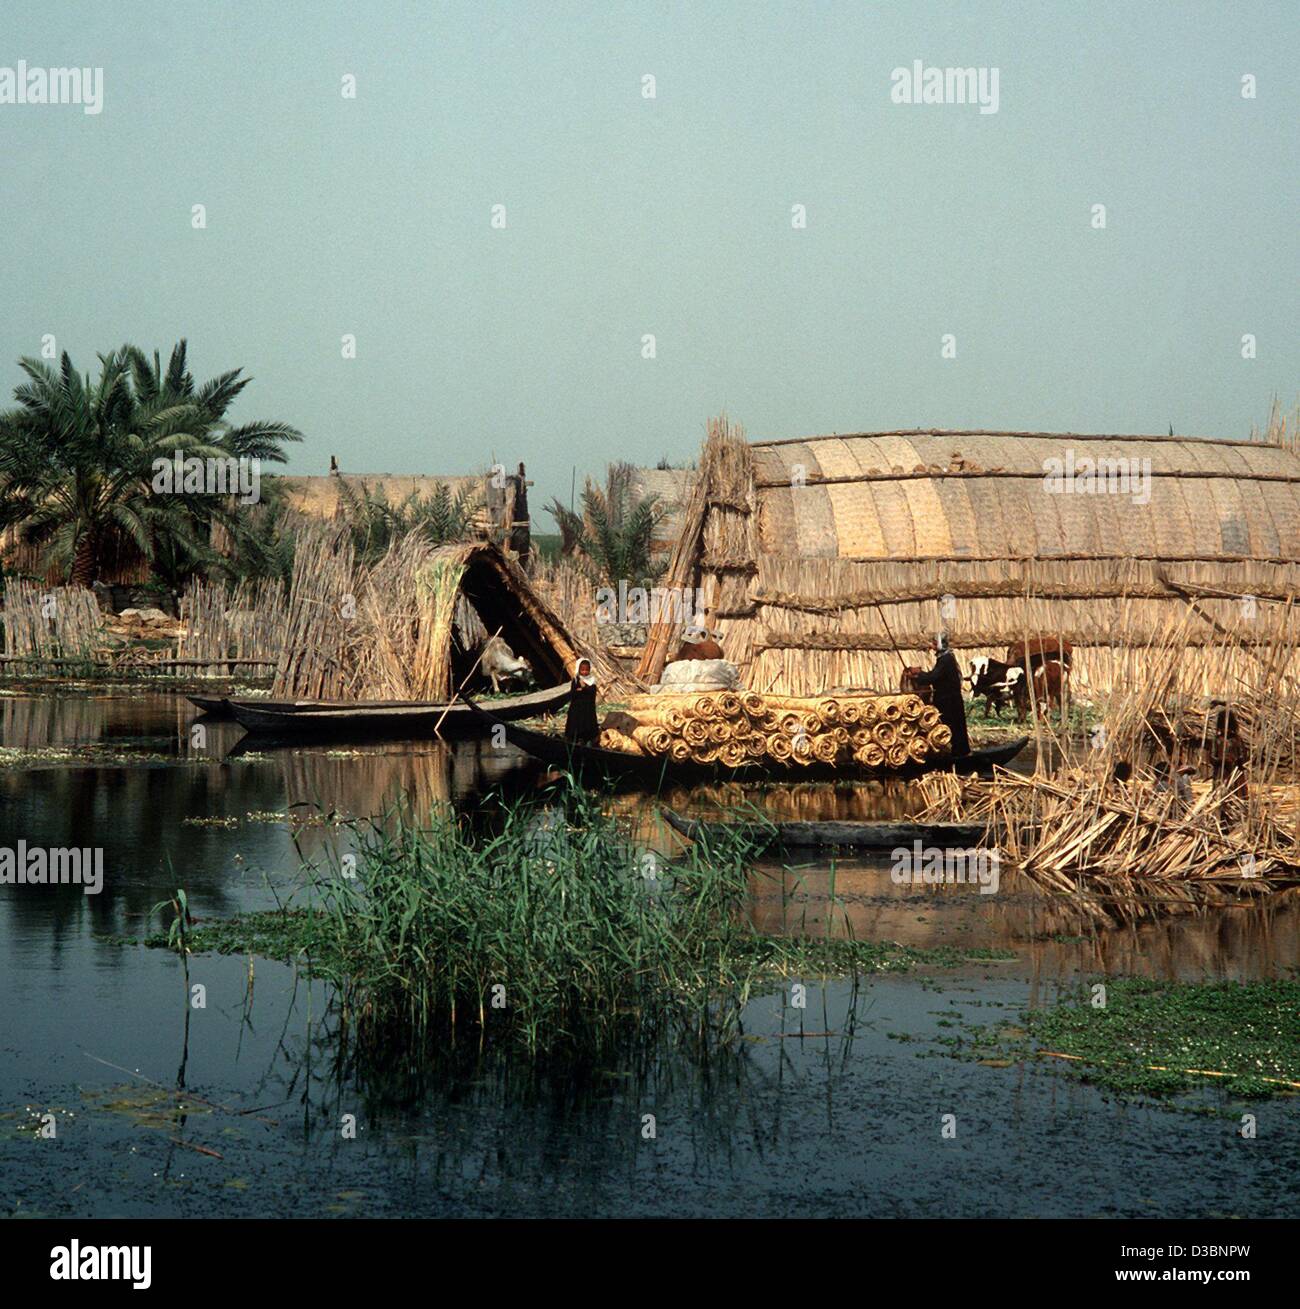 (dpa files) - Huts made of reed are standing on a small isle in the marshy land between the rivers Euphrates and Tigris in Iraq (undated). Stock Photo